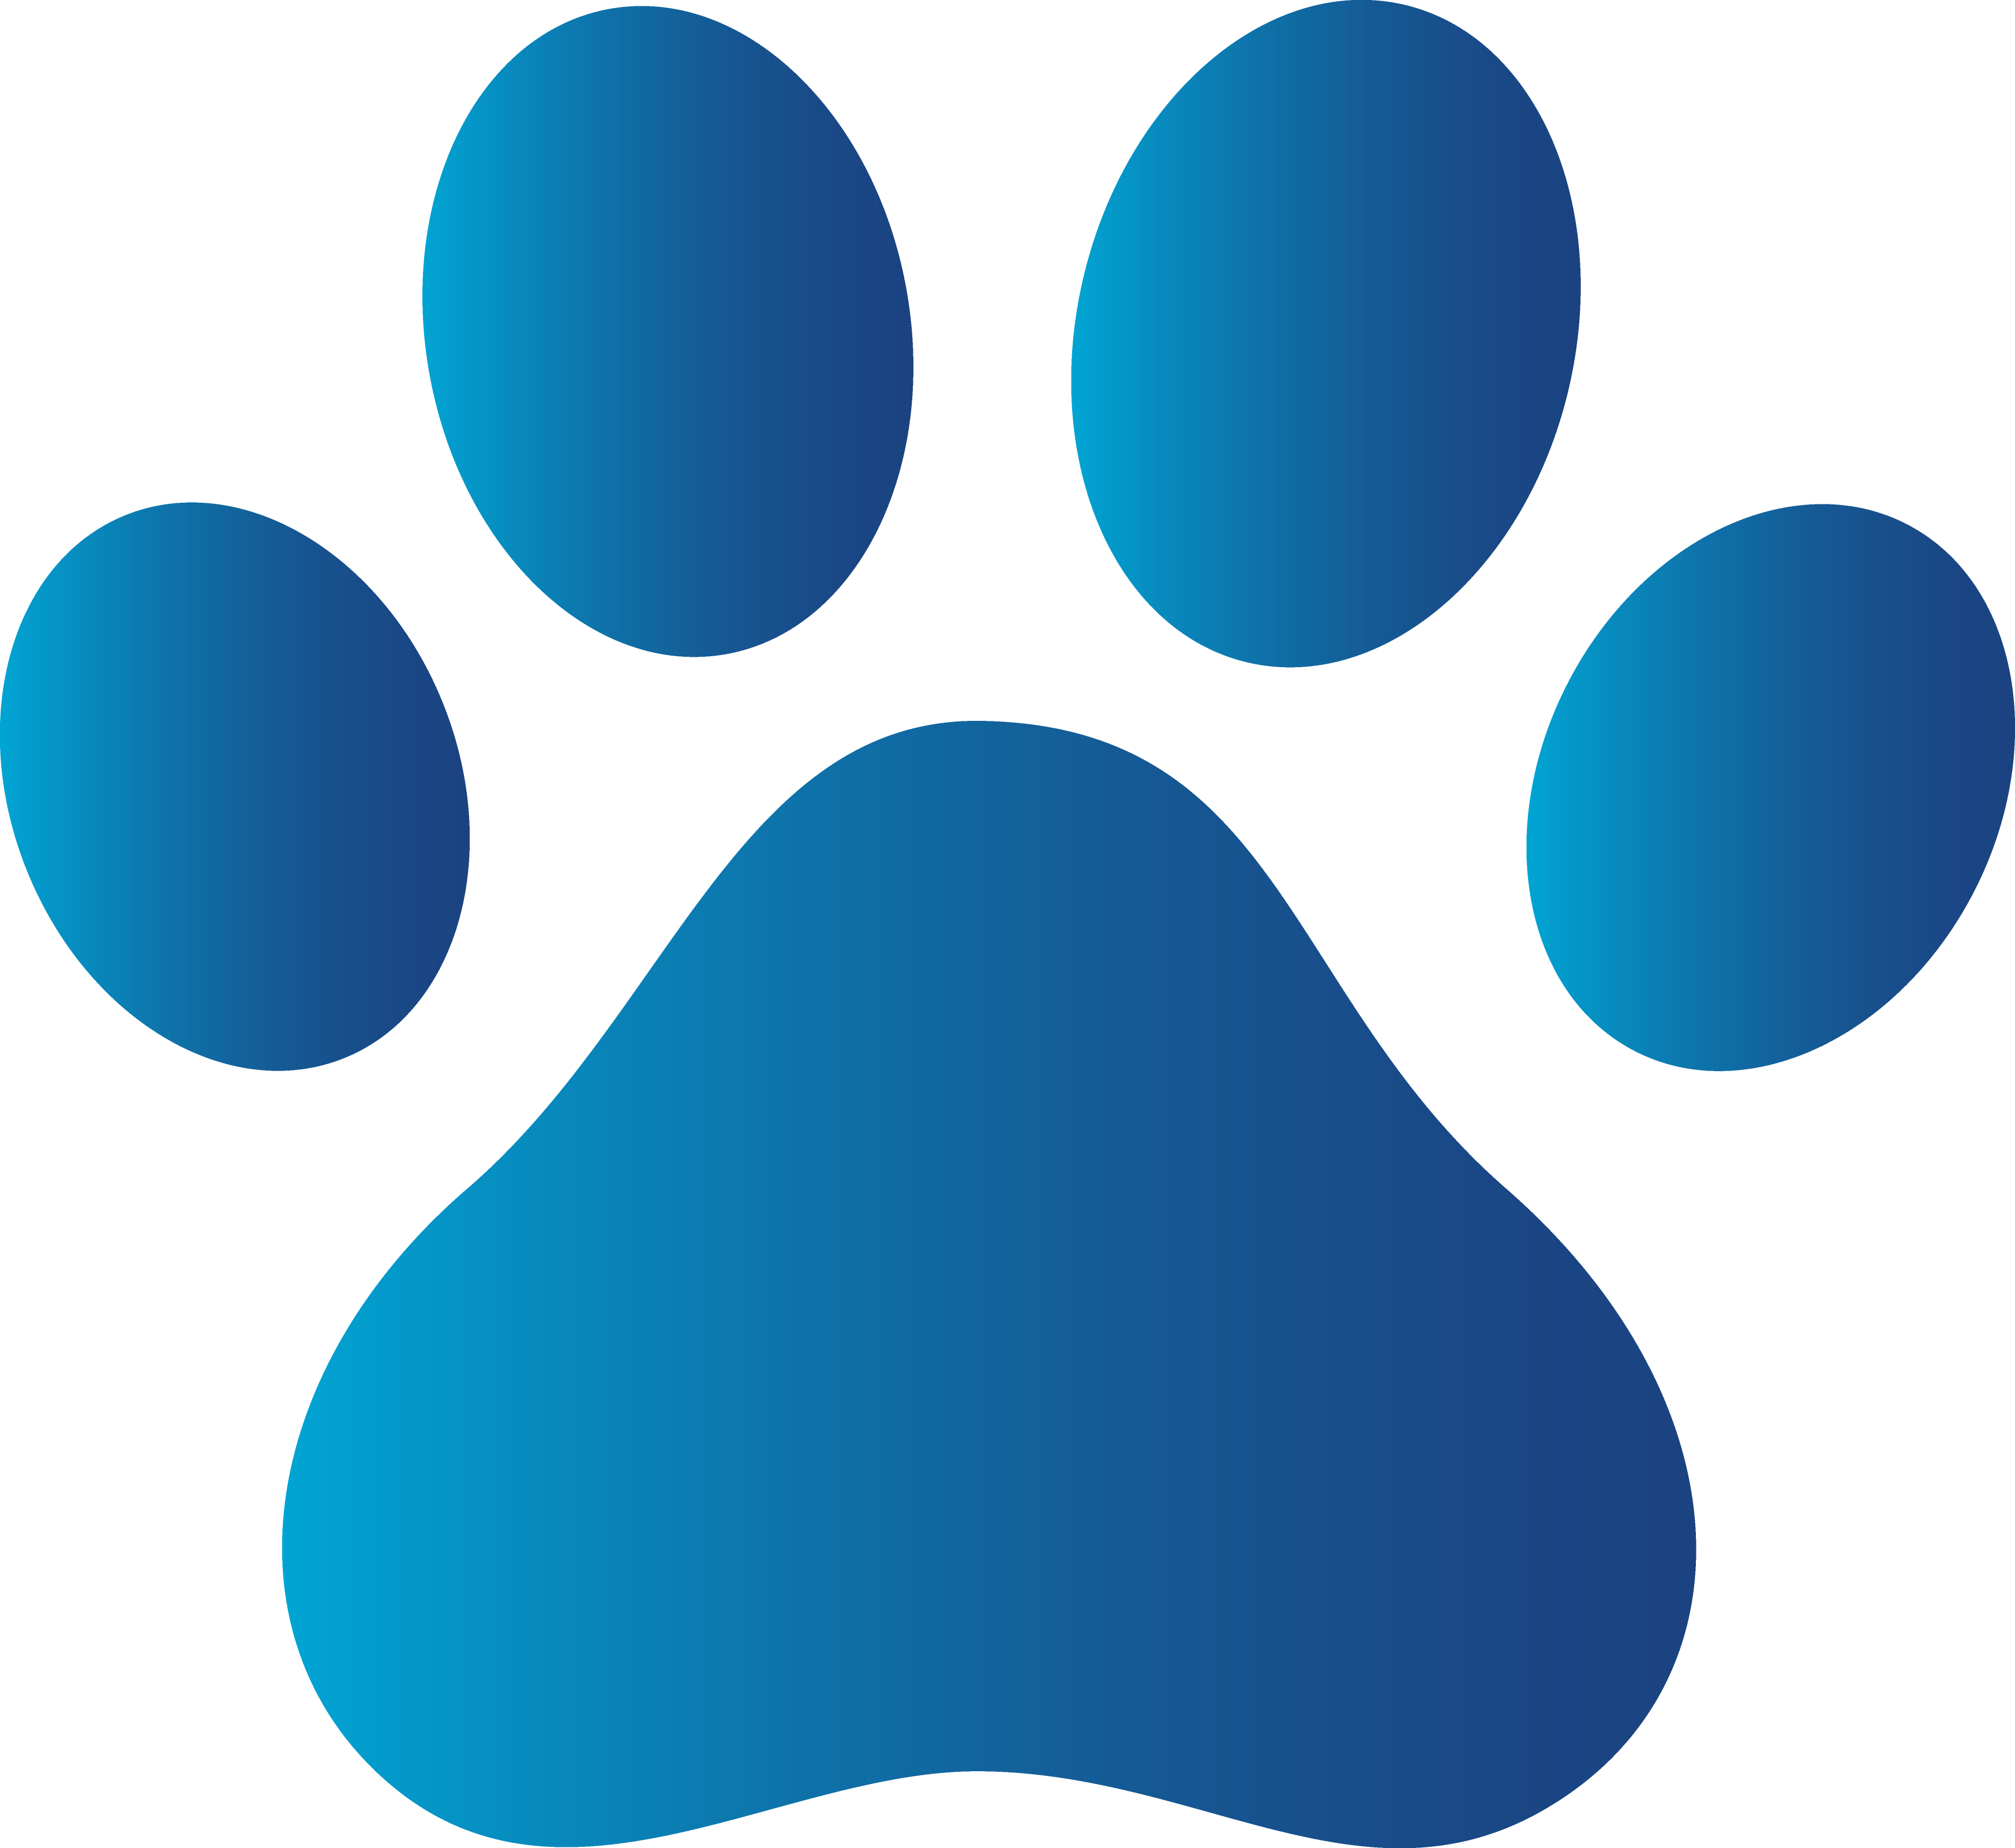 free-paw-print-graphic-download-free-paw-print-graphic-png-images